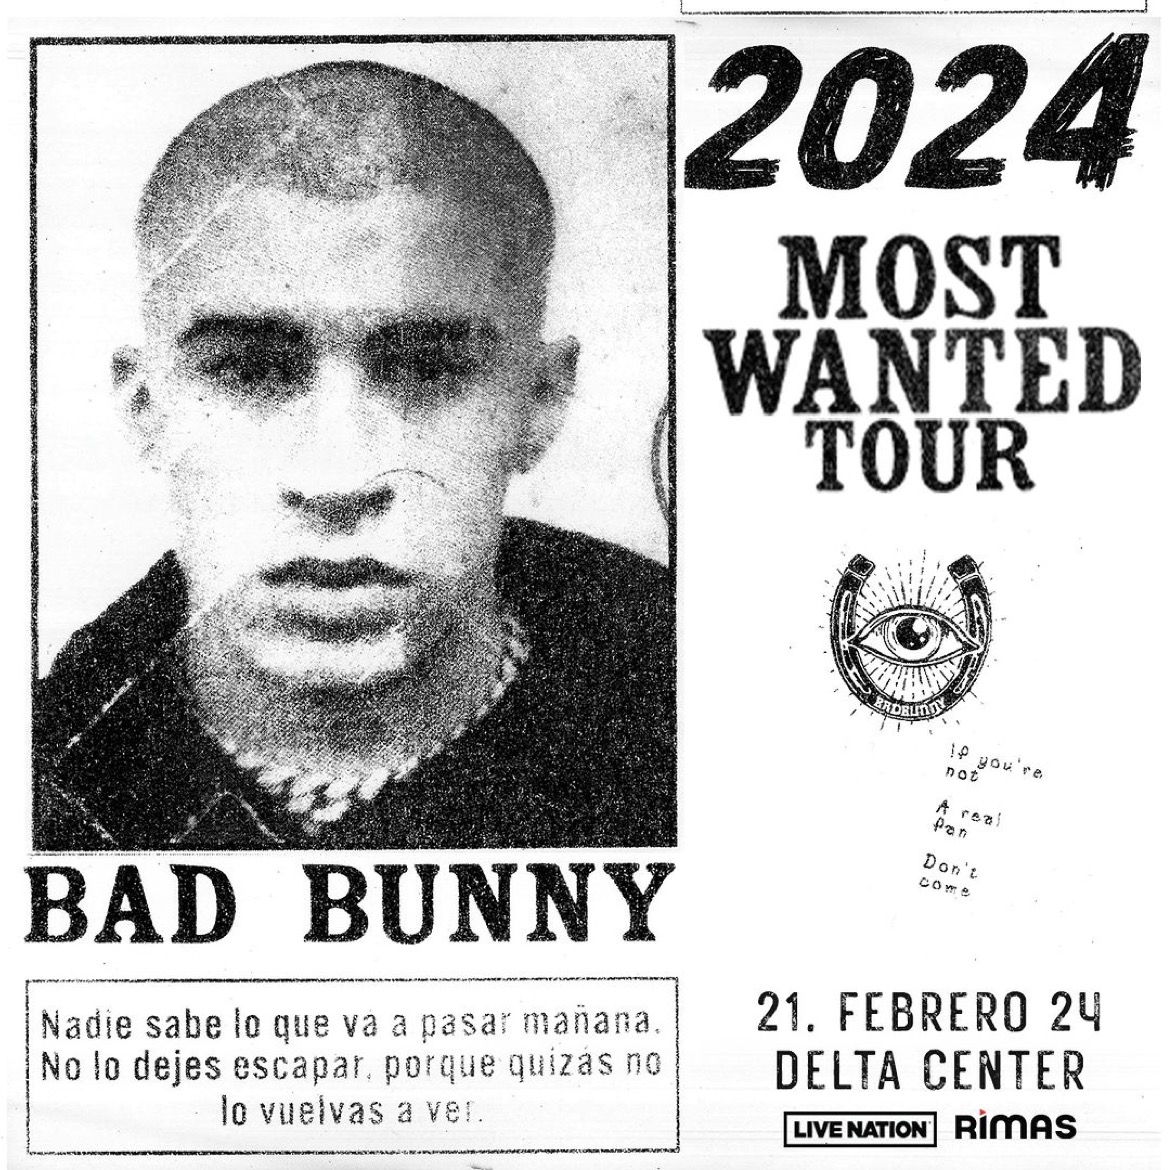 <h1 class="tribe-events-single-event-title">BAD BUNNY</h1>